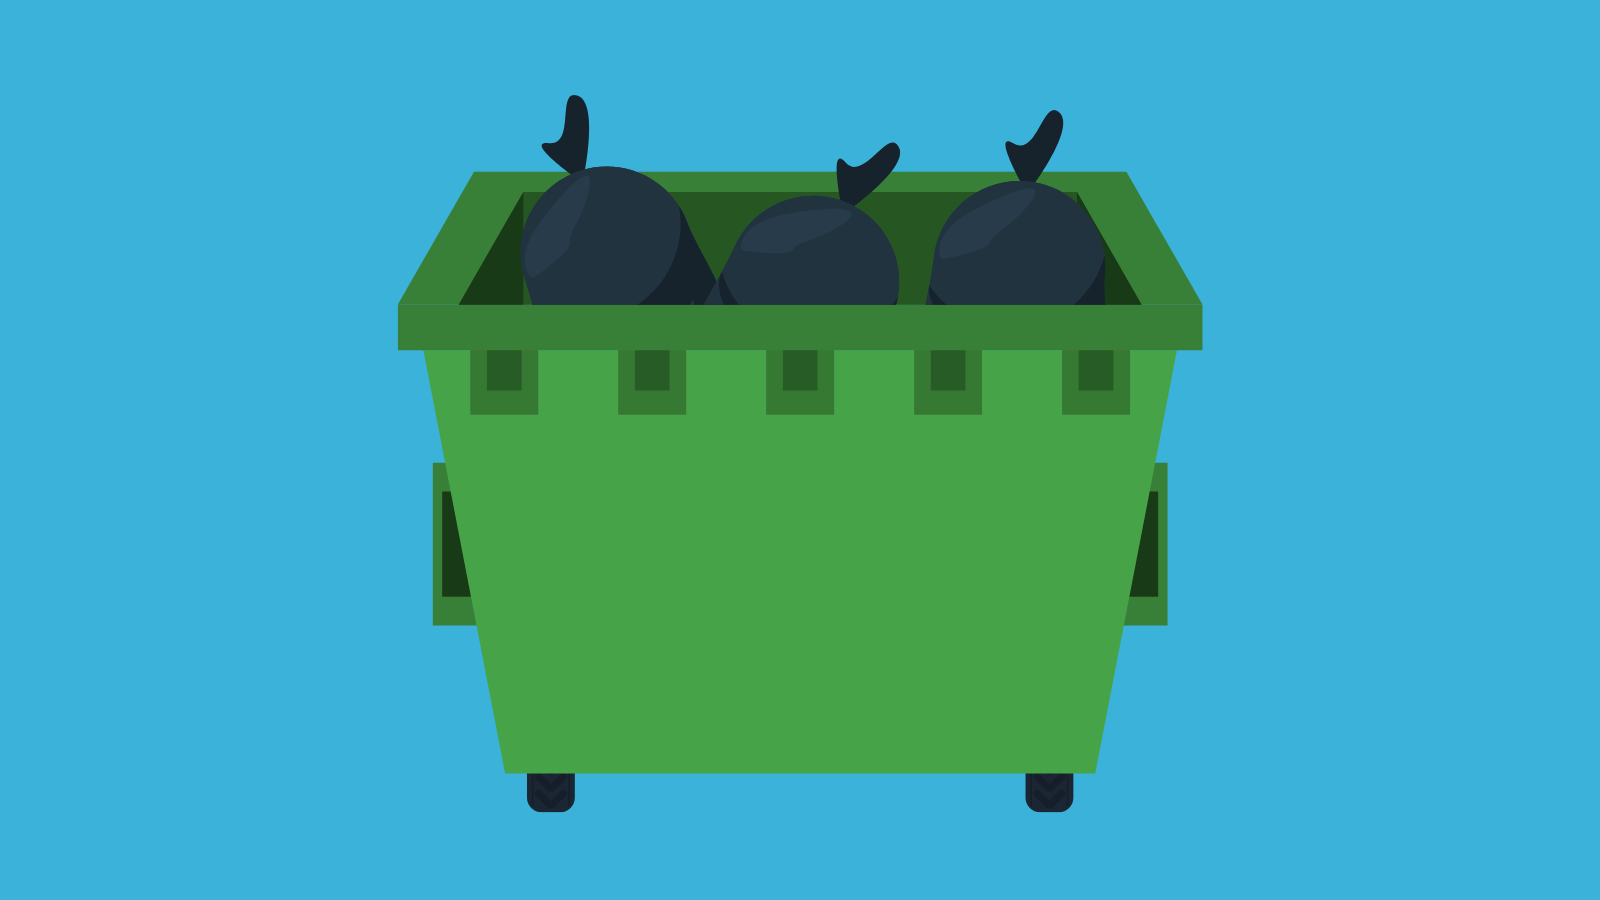 A green dumpster with three garbage bags inside